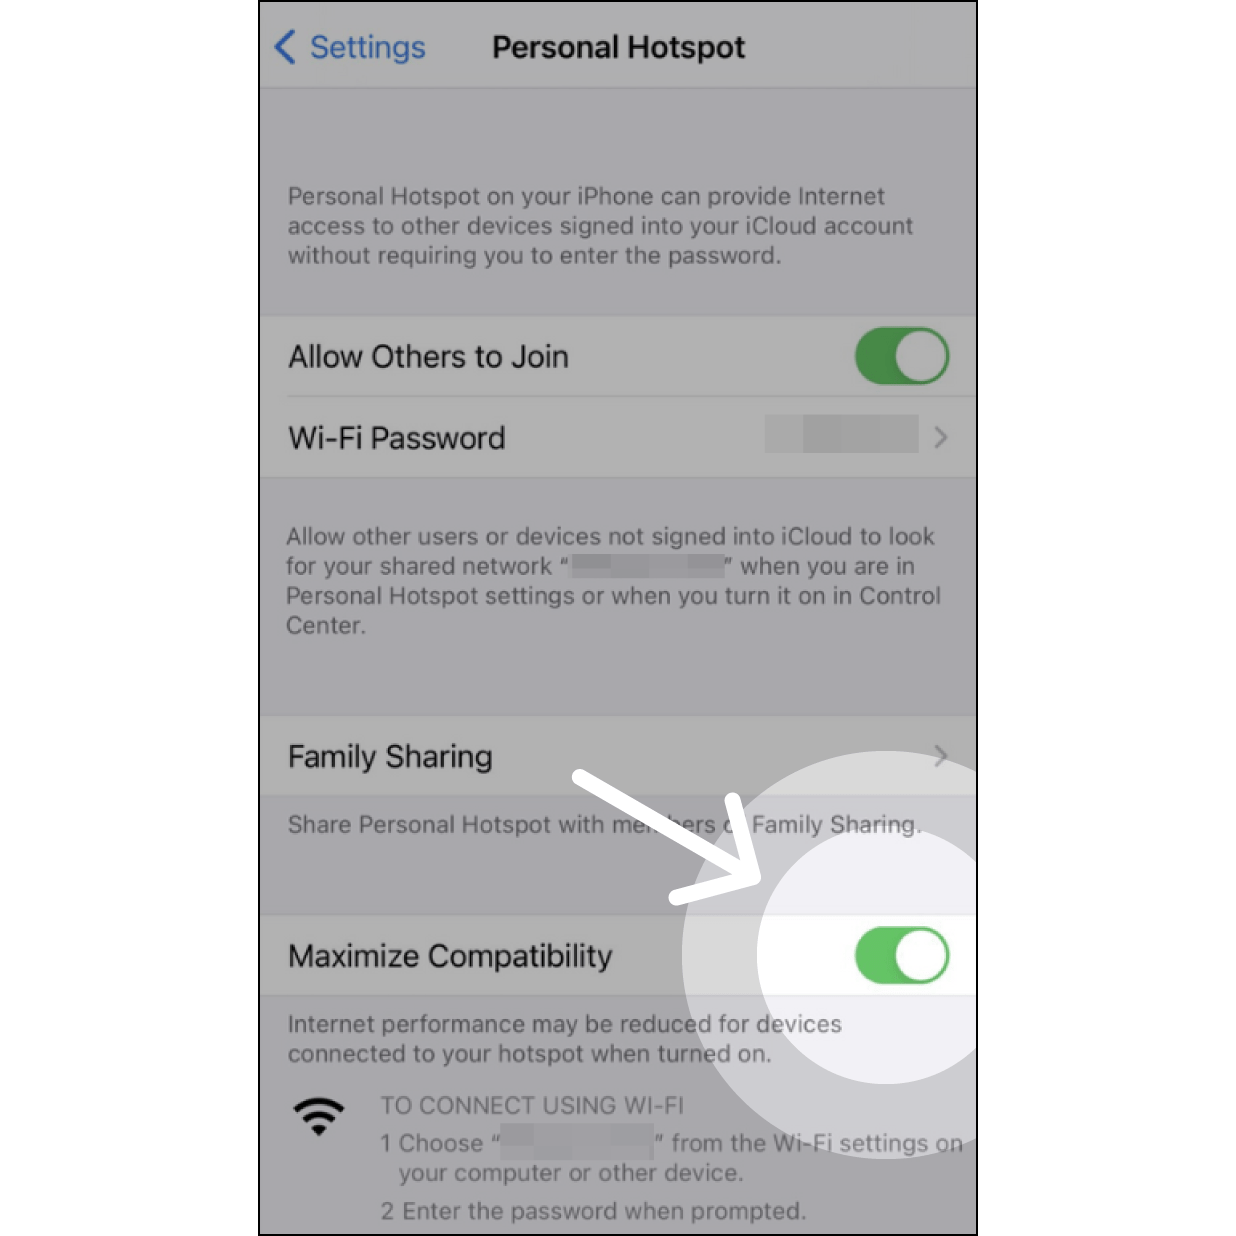 If you use iPhone 12, in the “Settings Page” > “Hotspot”, there is a new "Maximize Compatibility" toggle that needs to be enabled. Then your Muro Box can use your iPhone 12's hotspot for connection setting.